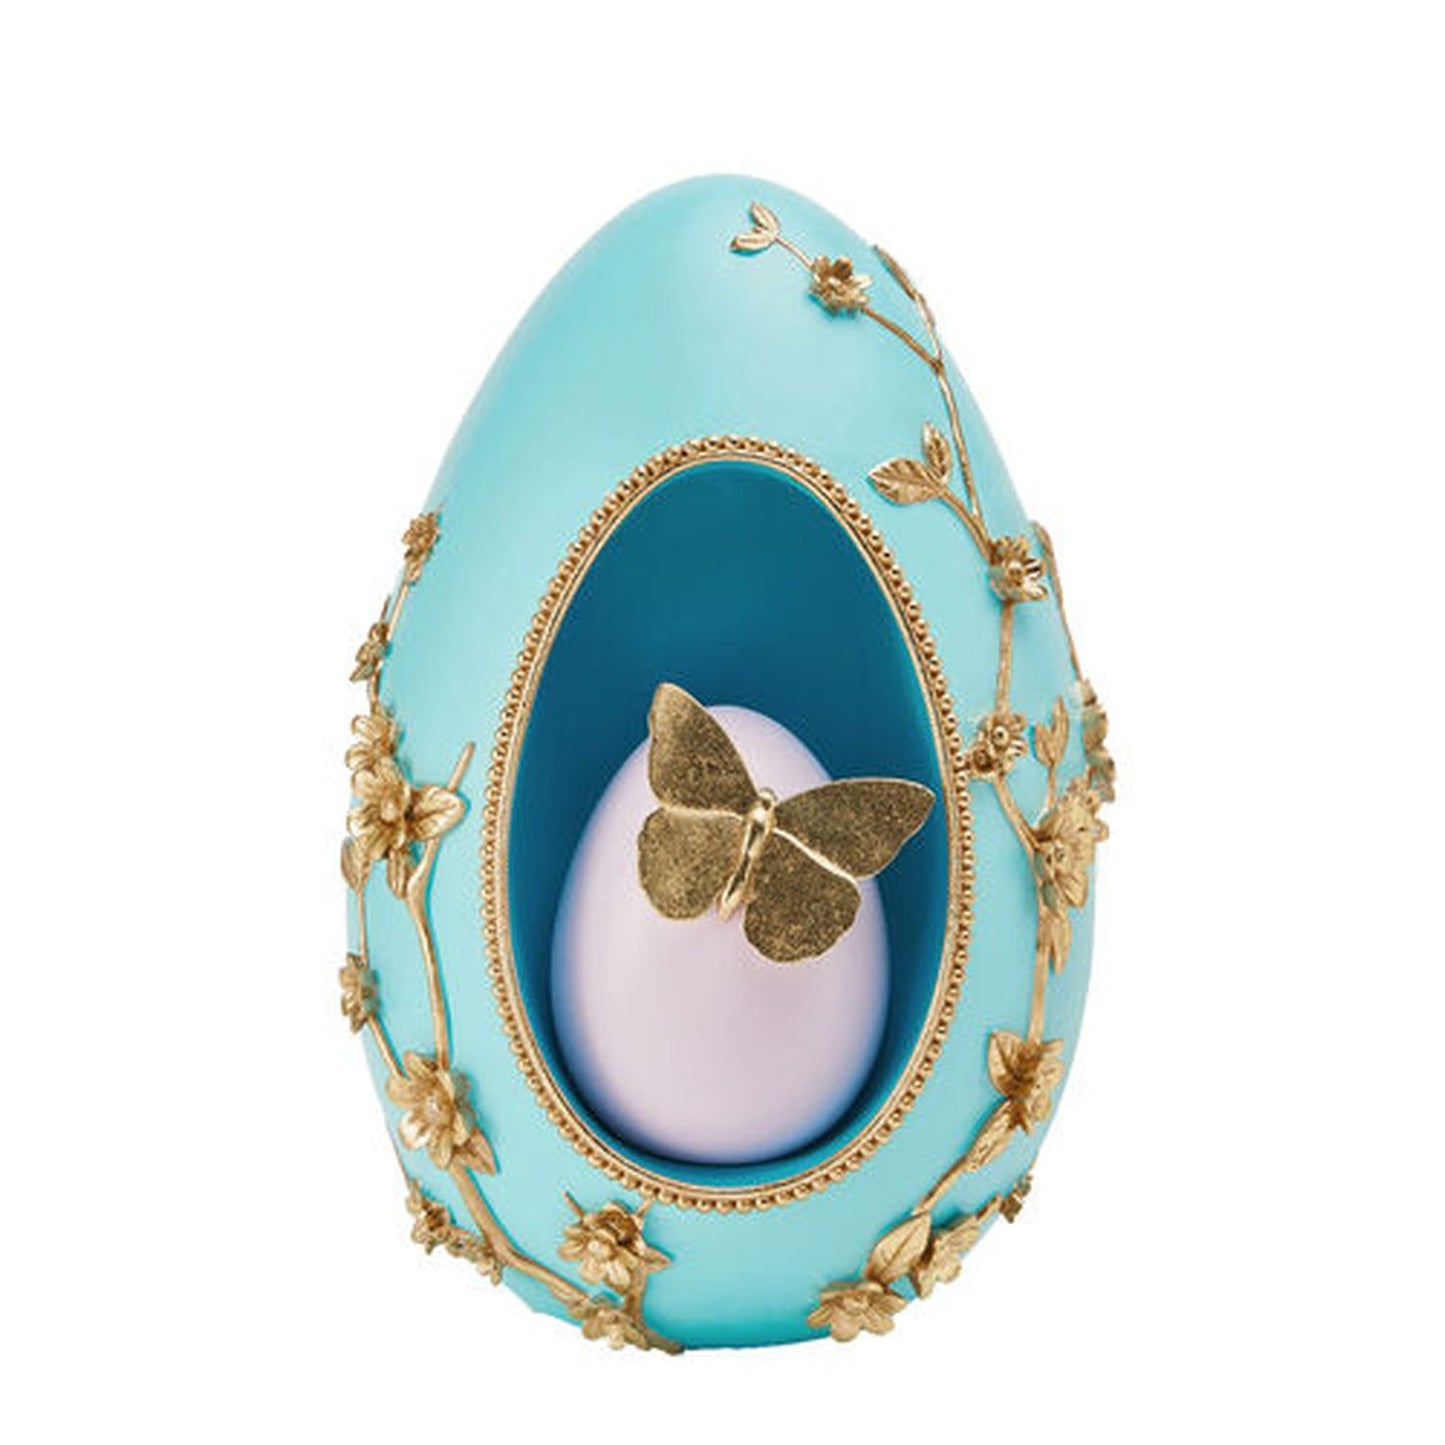 December Diamonds Spring Confections 14" Teal Egg With Butterfly Inside